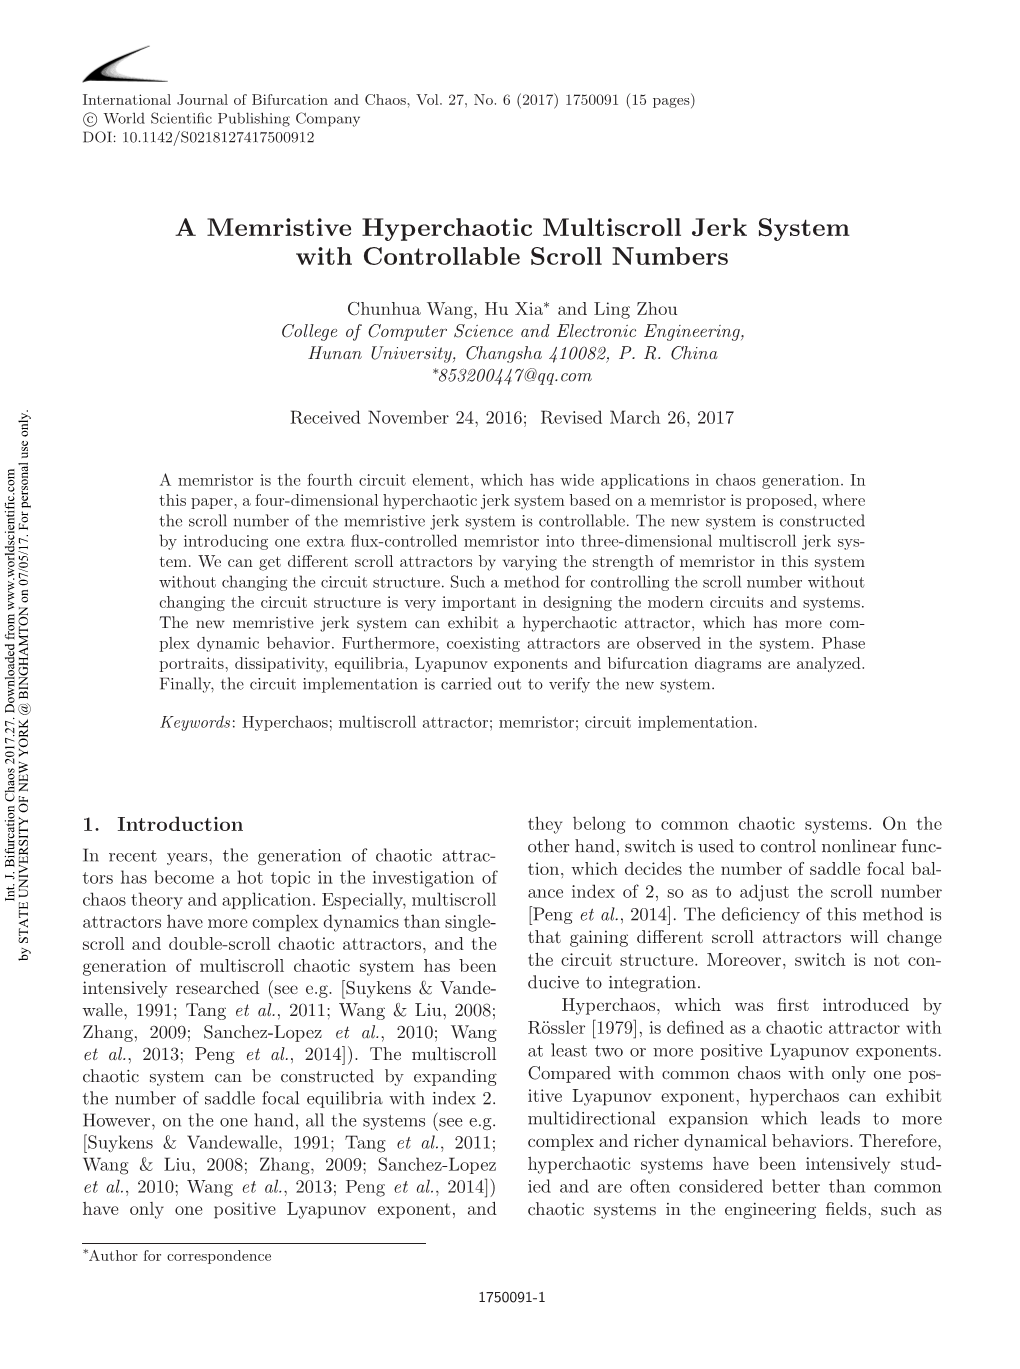 A Memristive Hyperchaotic Multiscroll Jerk System with Controllable Scroll Numbers